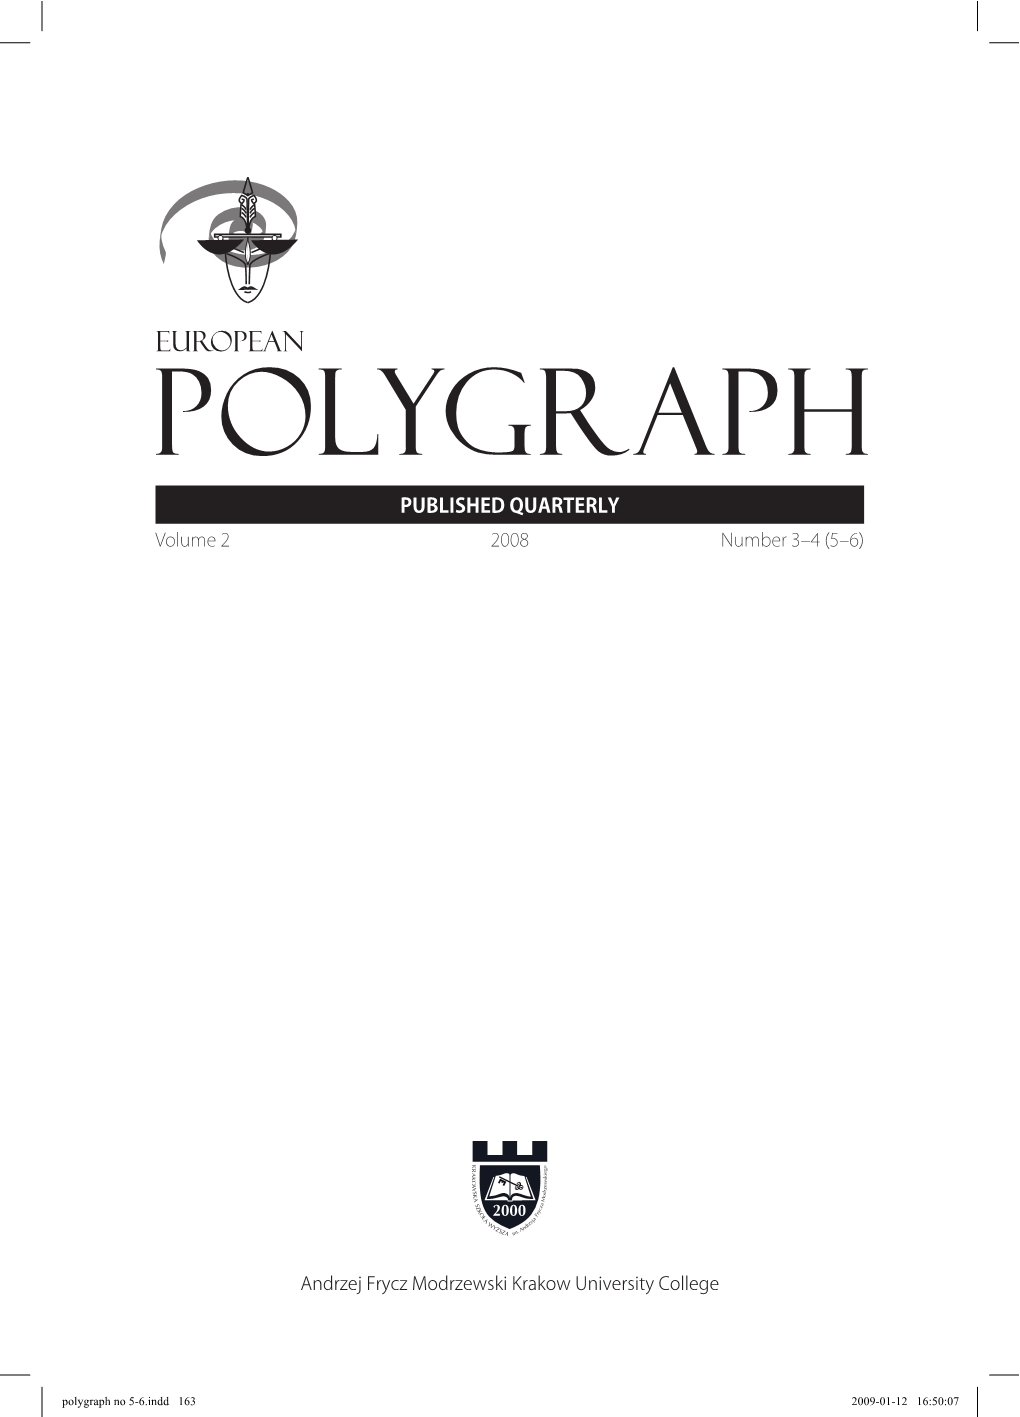 Ways of Revealing Resistance Against Polygraph Testing Cover Image